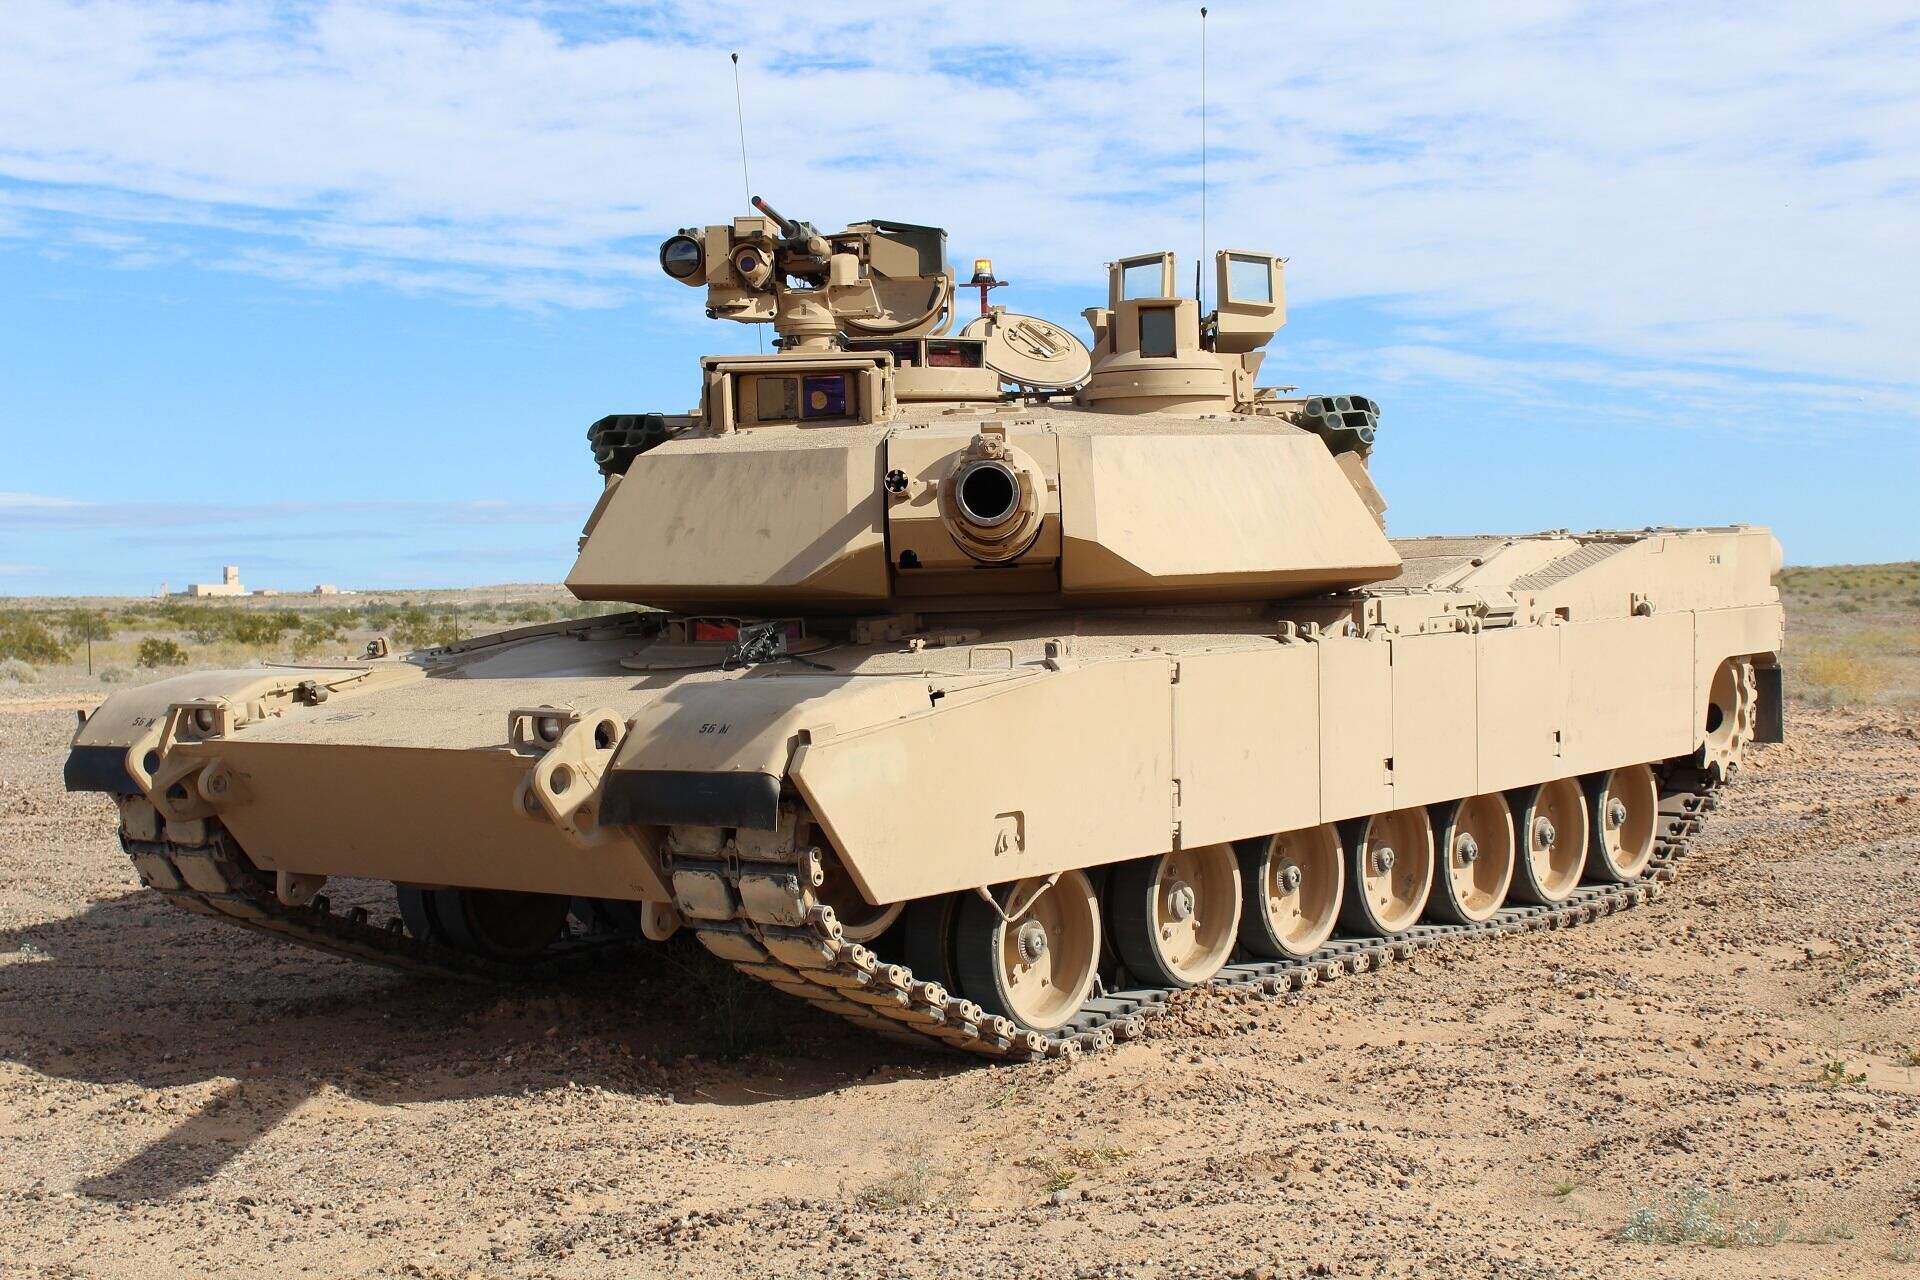 The US Army's Slowest and Fastest Tanks Ever - 24/7 Wall St.